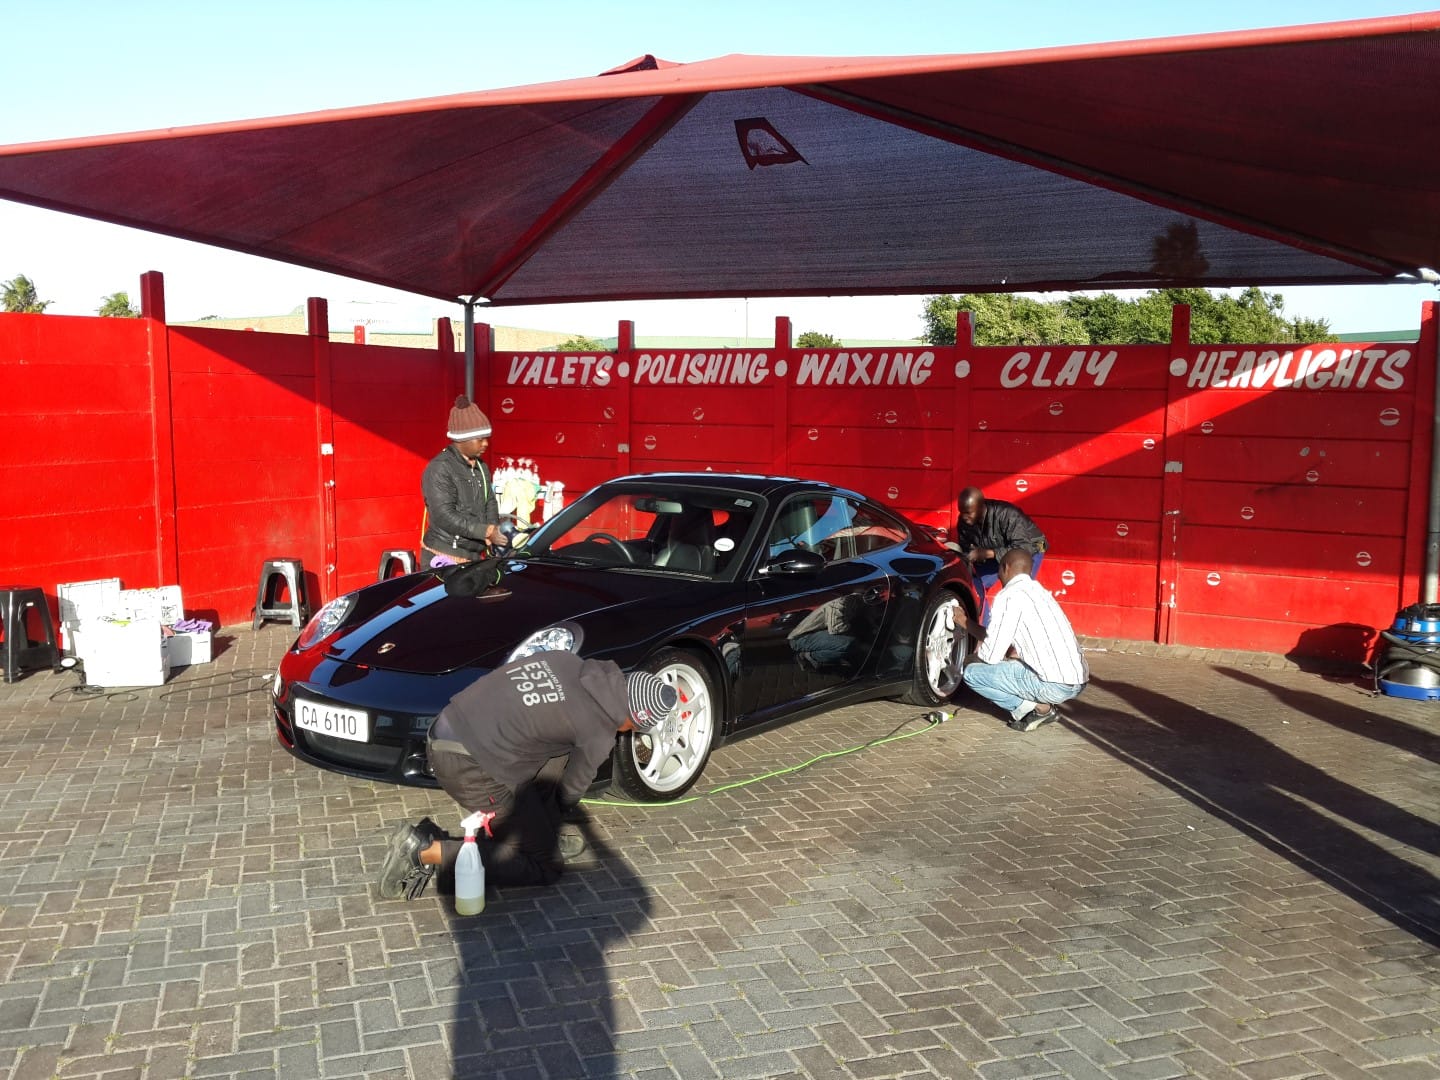 Team work makes the dream work - photo of the team correcting and detailing the Porsche
